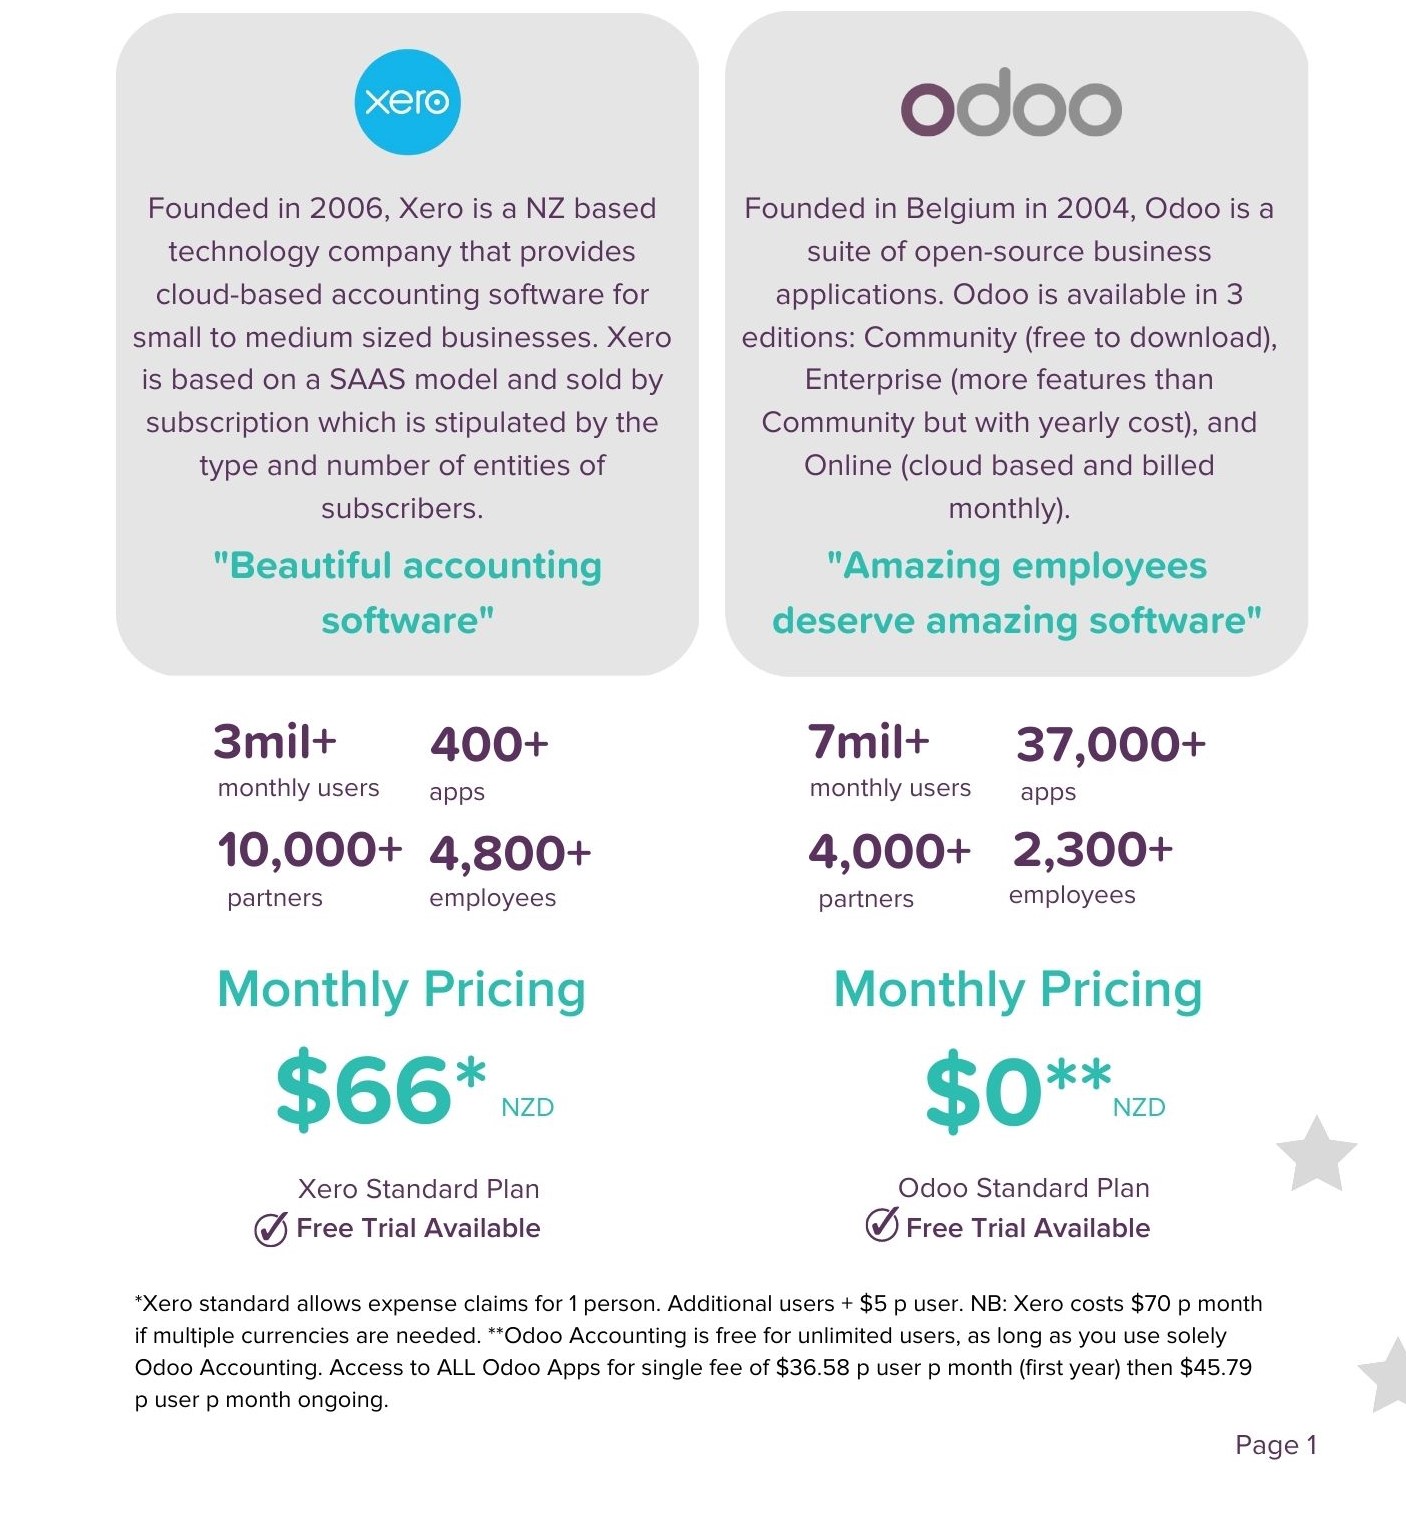 Side by side comparison of Odoo and Xero KPI's, costs and founding stories.